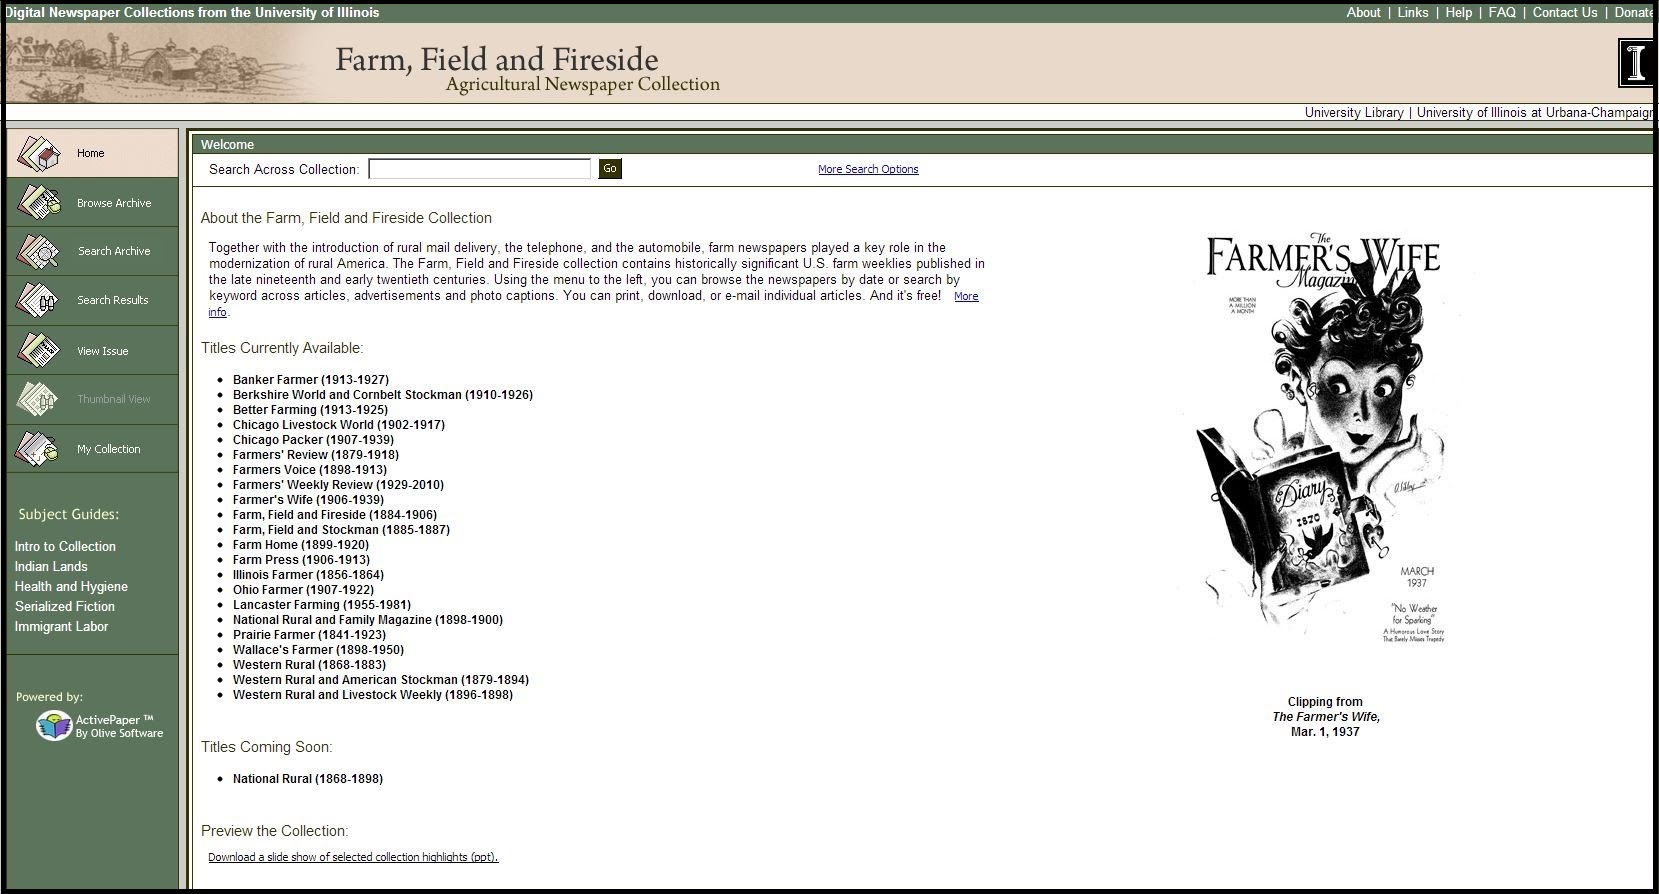 Original Interface for the Farm, Field, and Fireside Digital Collection